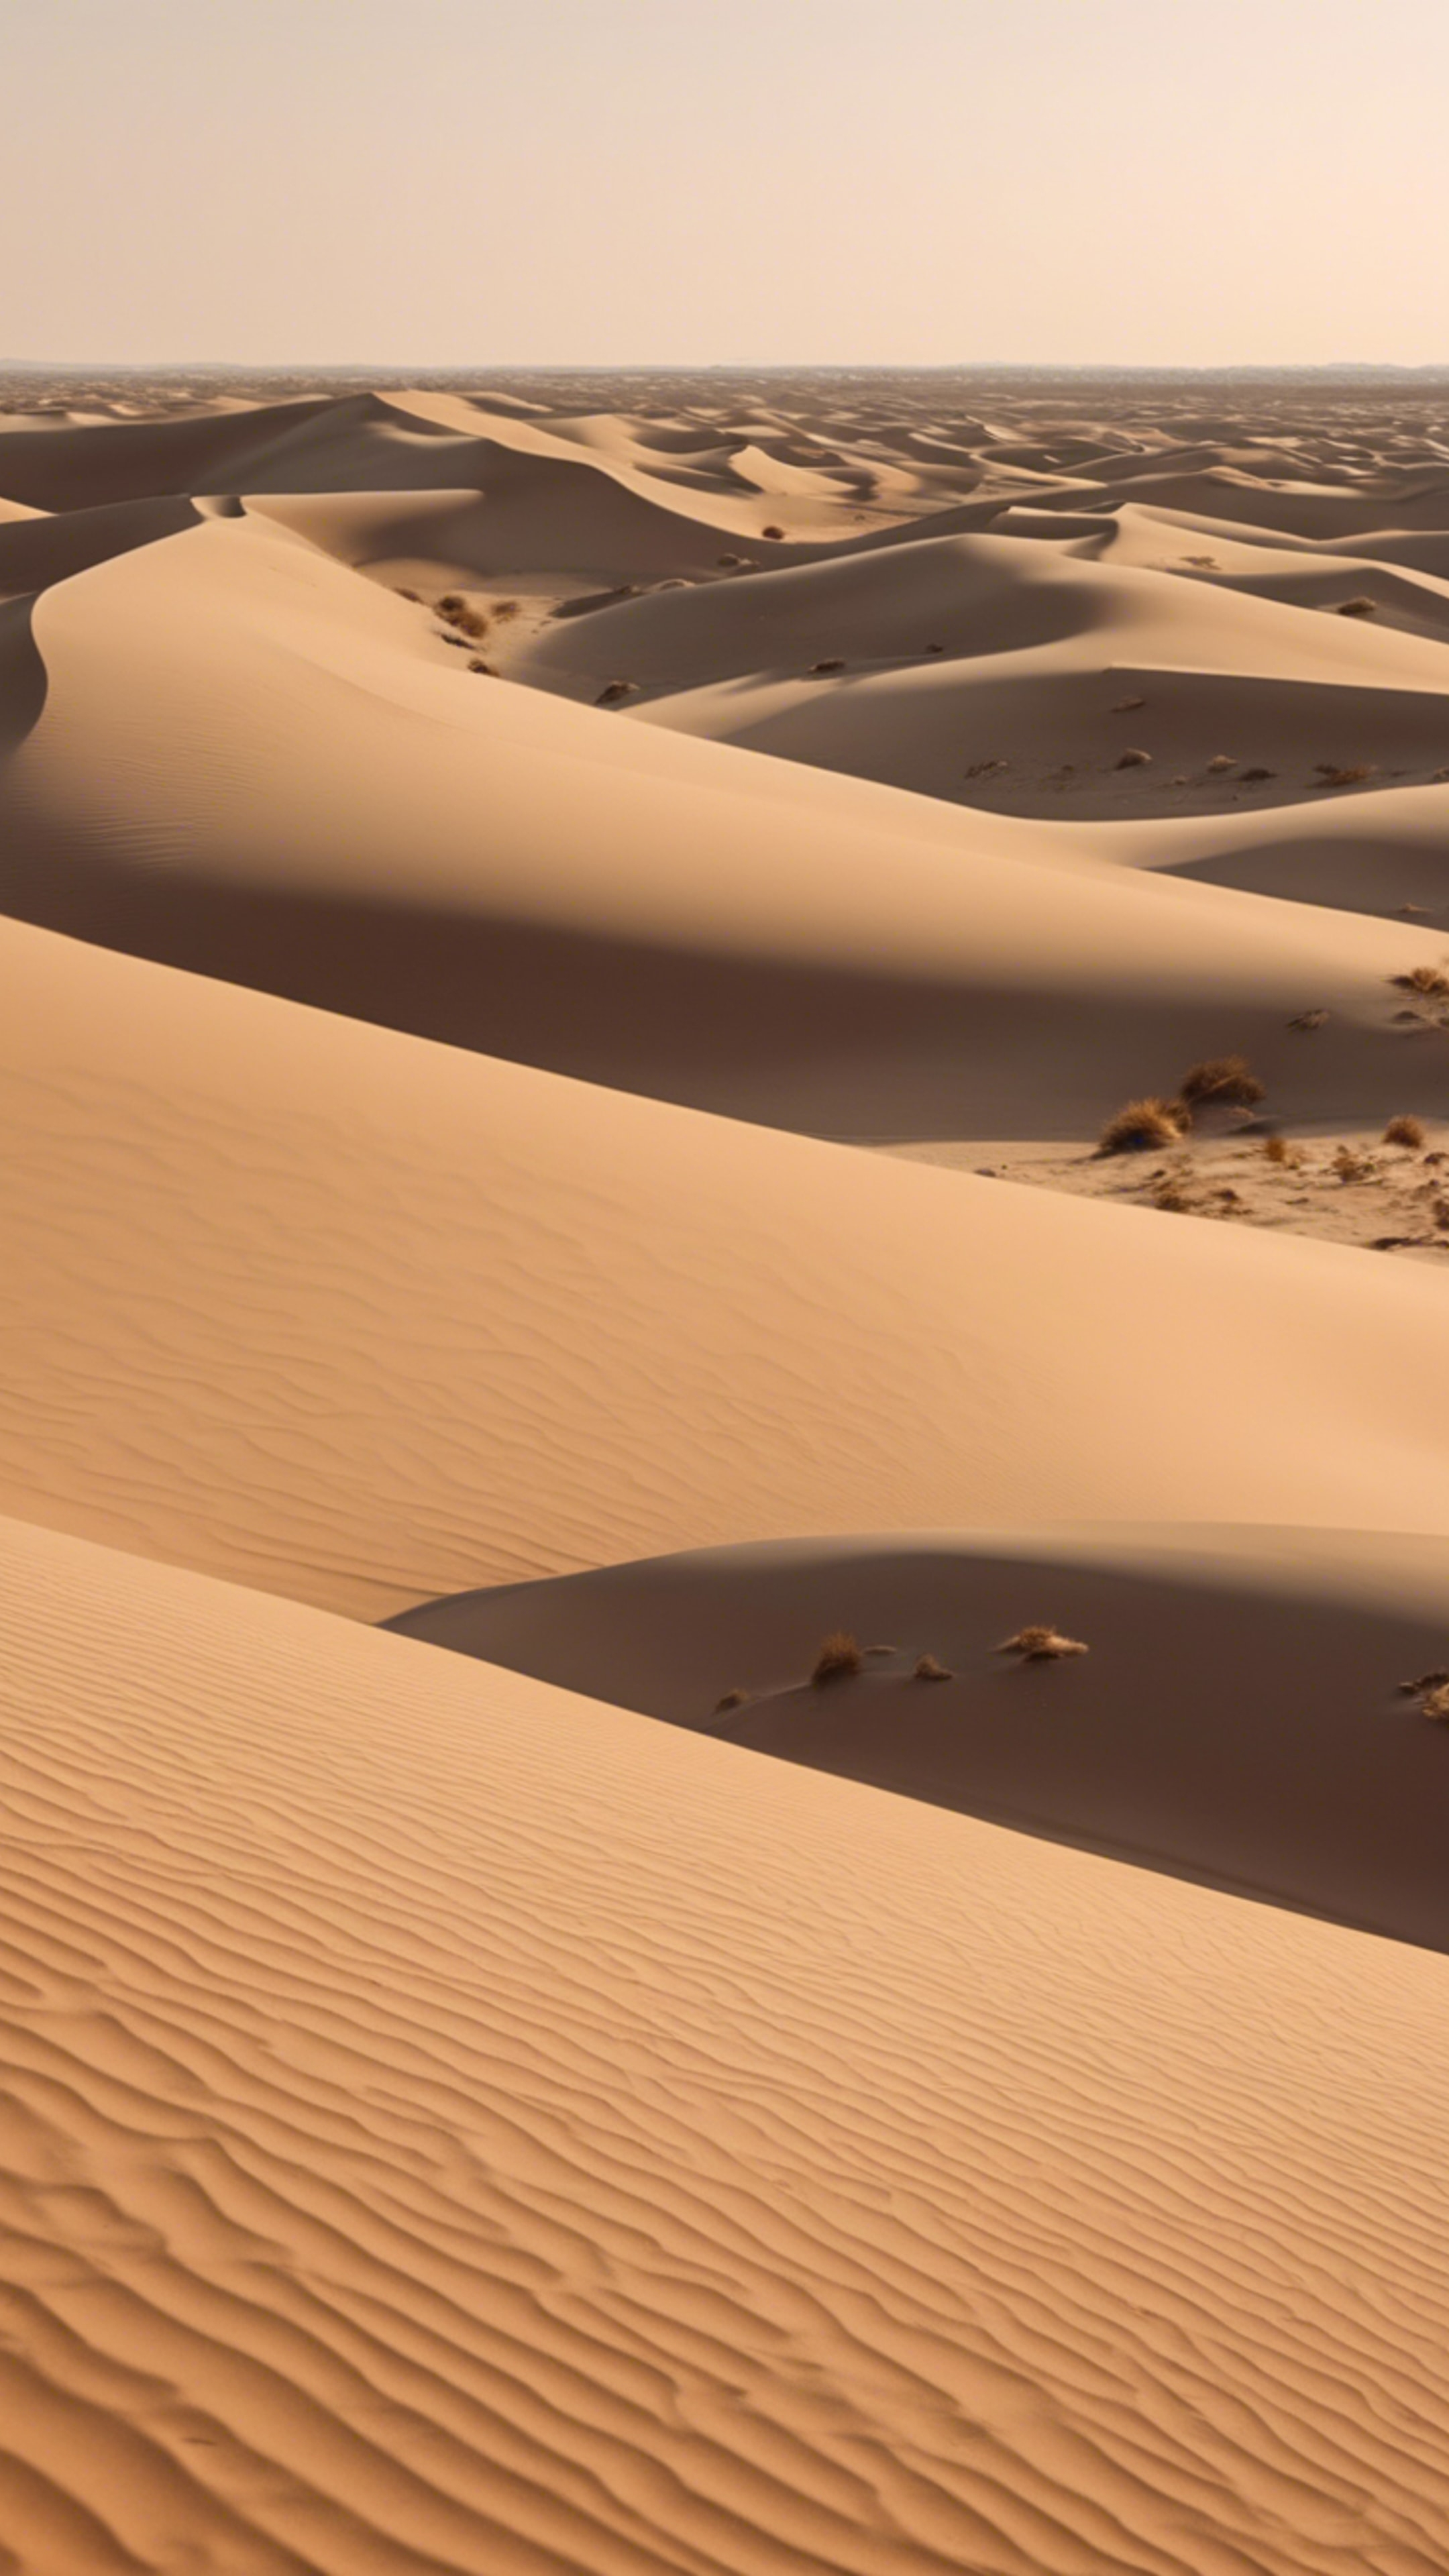 A sea of sand dunes under the hot desert sun, showing off different shades of cool beige. Behang[a9abeda4731b4762b3d0]